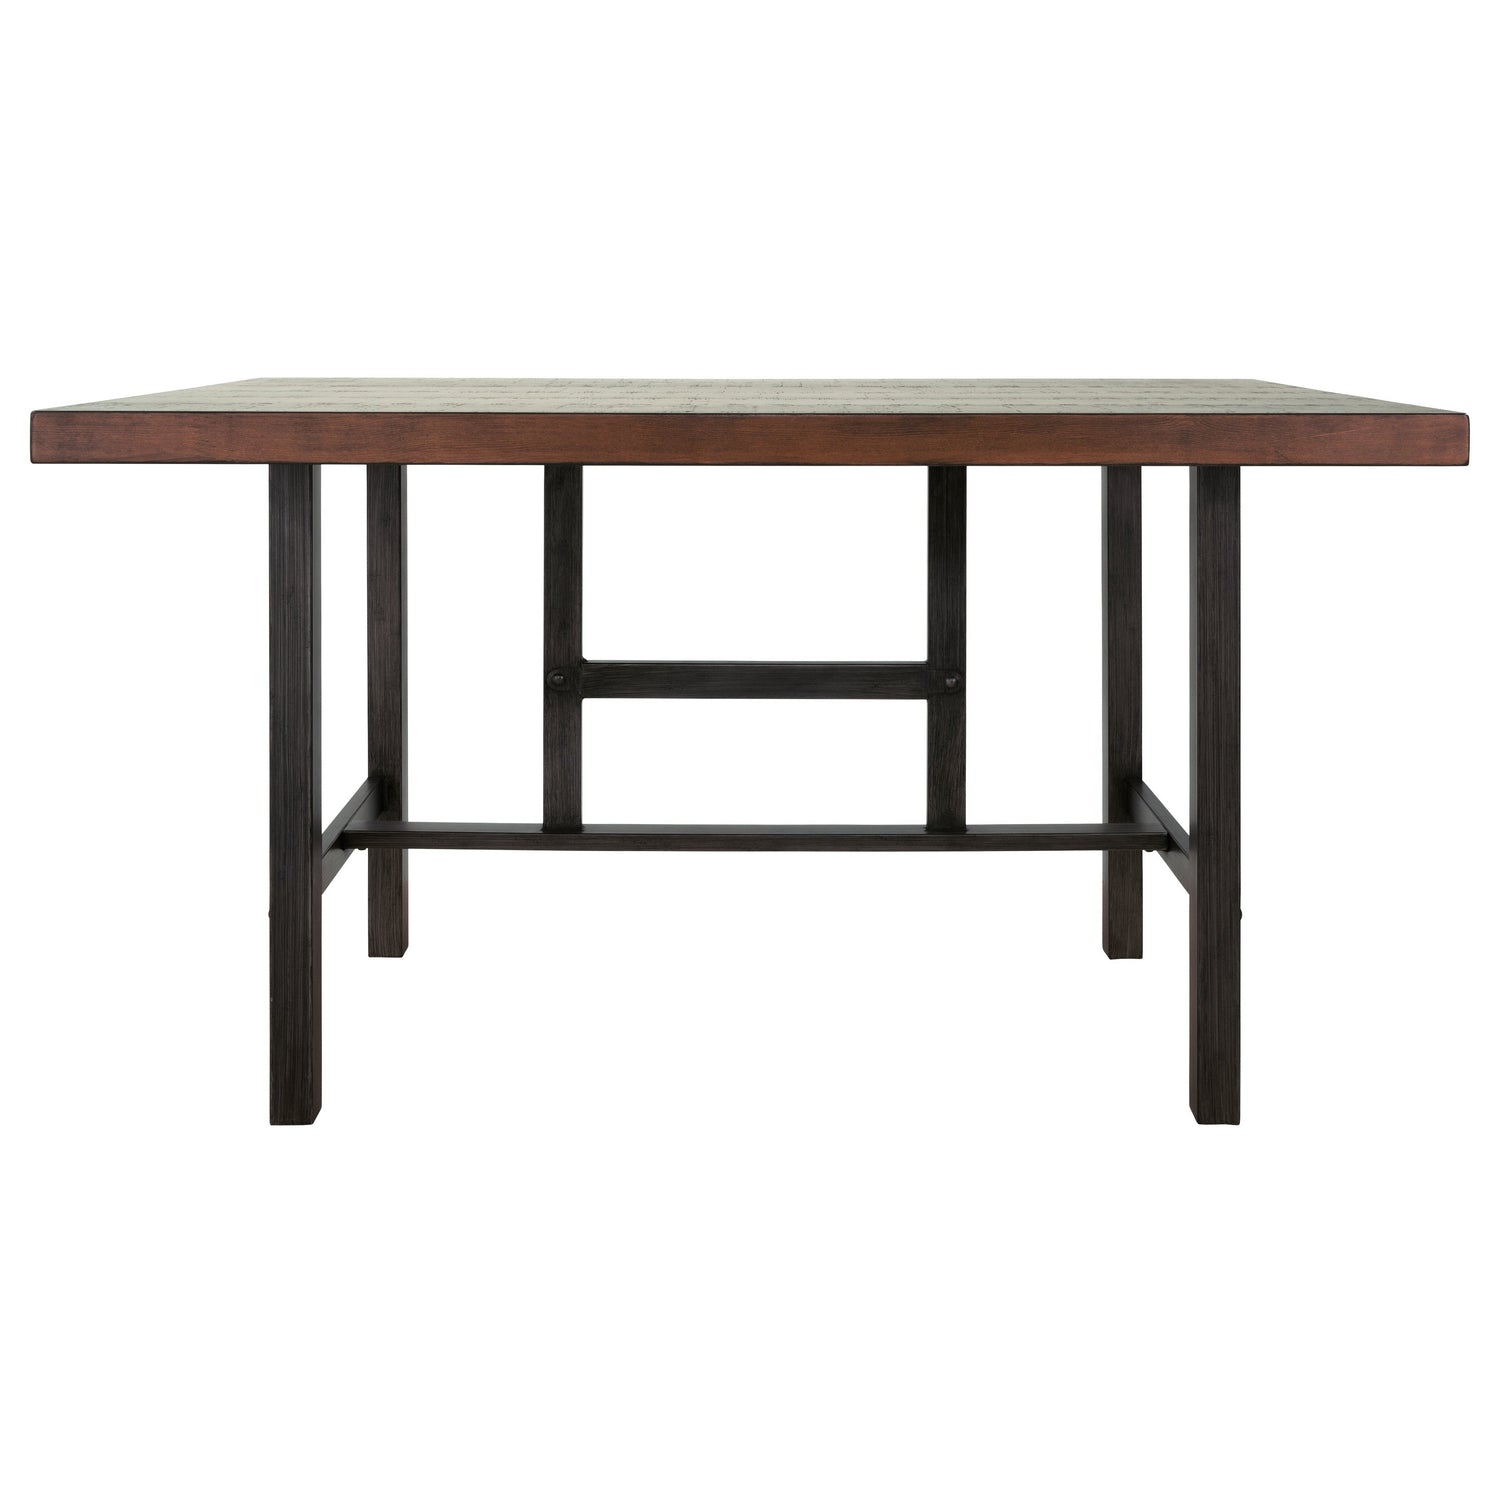 Kavara Counter Height Dining Table with 4 Barstools Ash-D469D1